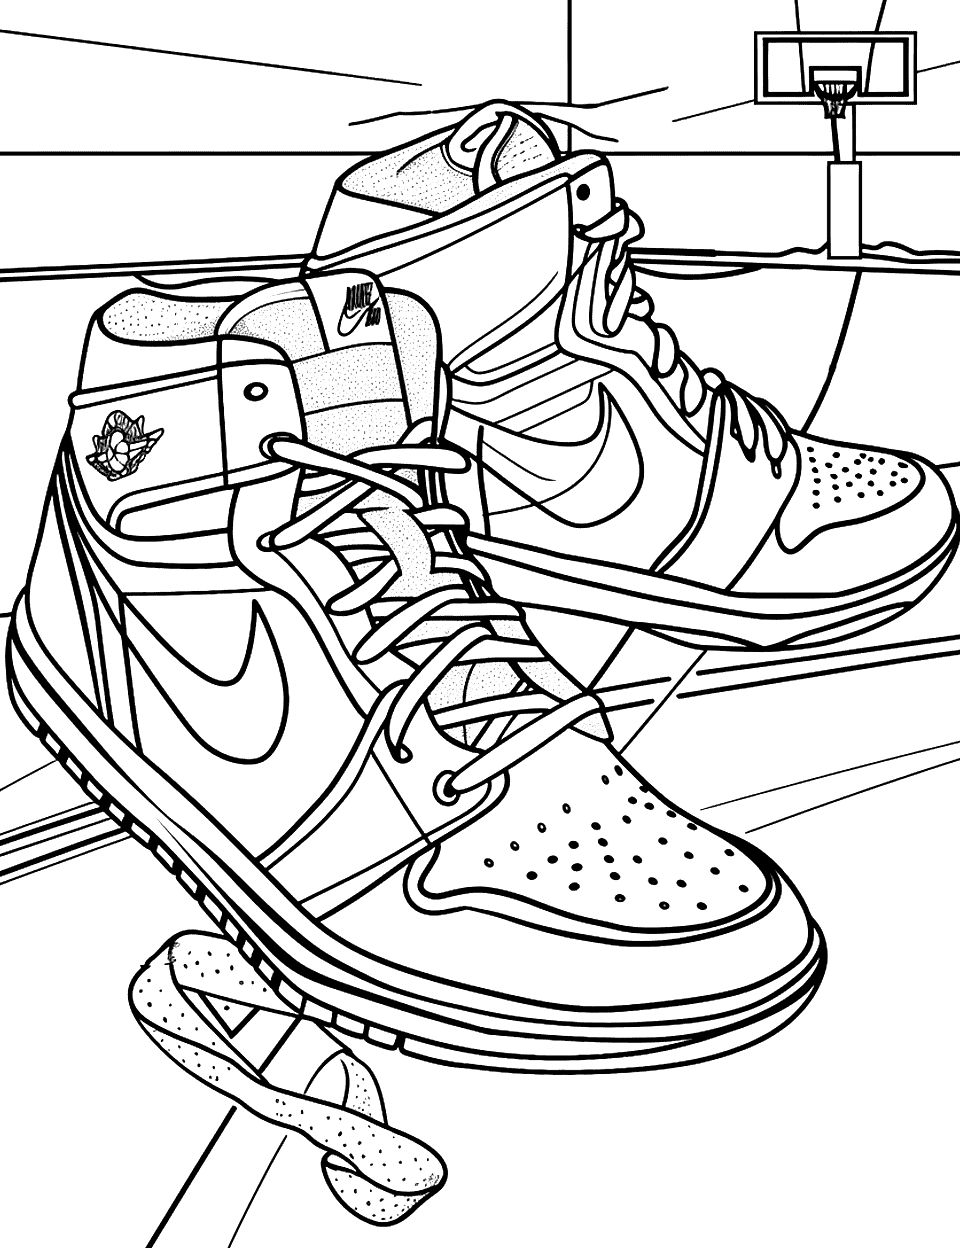 Basketball Shoes in Action Shoe Coloring Page - A pair of basketball shoes with dynamic motion lines on a basketball court, with a hoop in the distance.